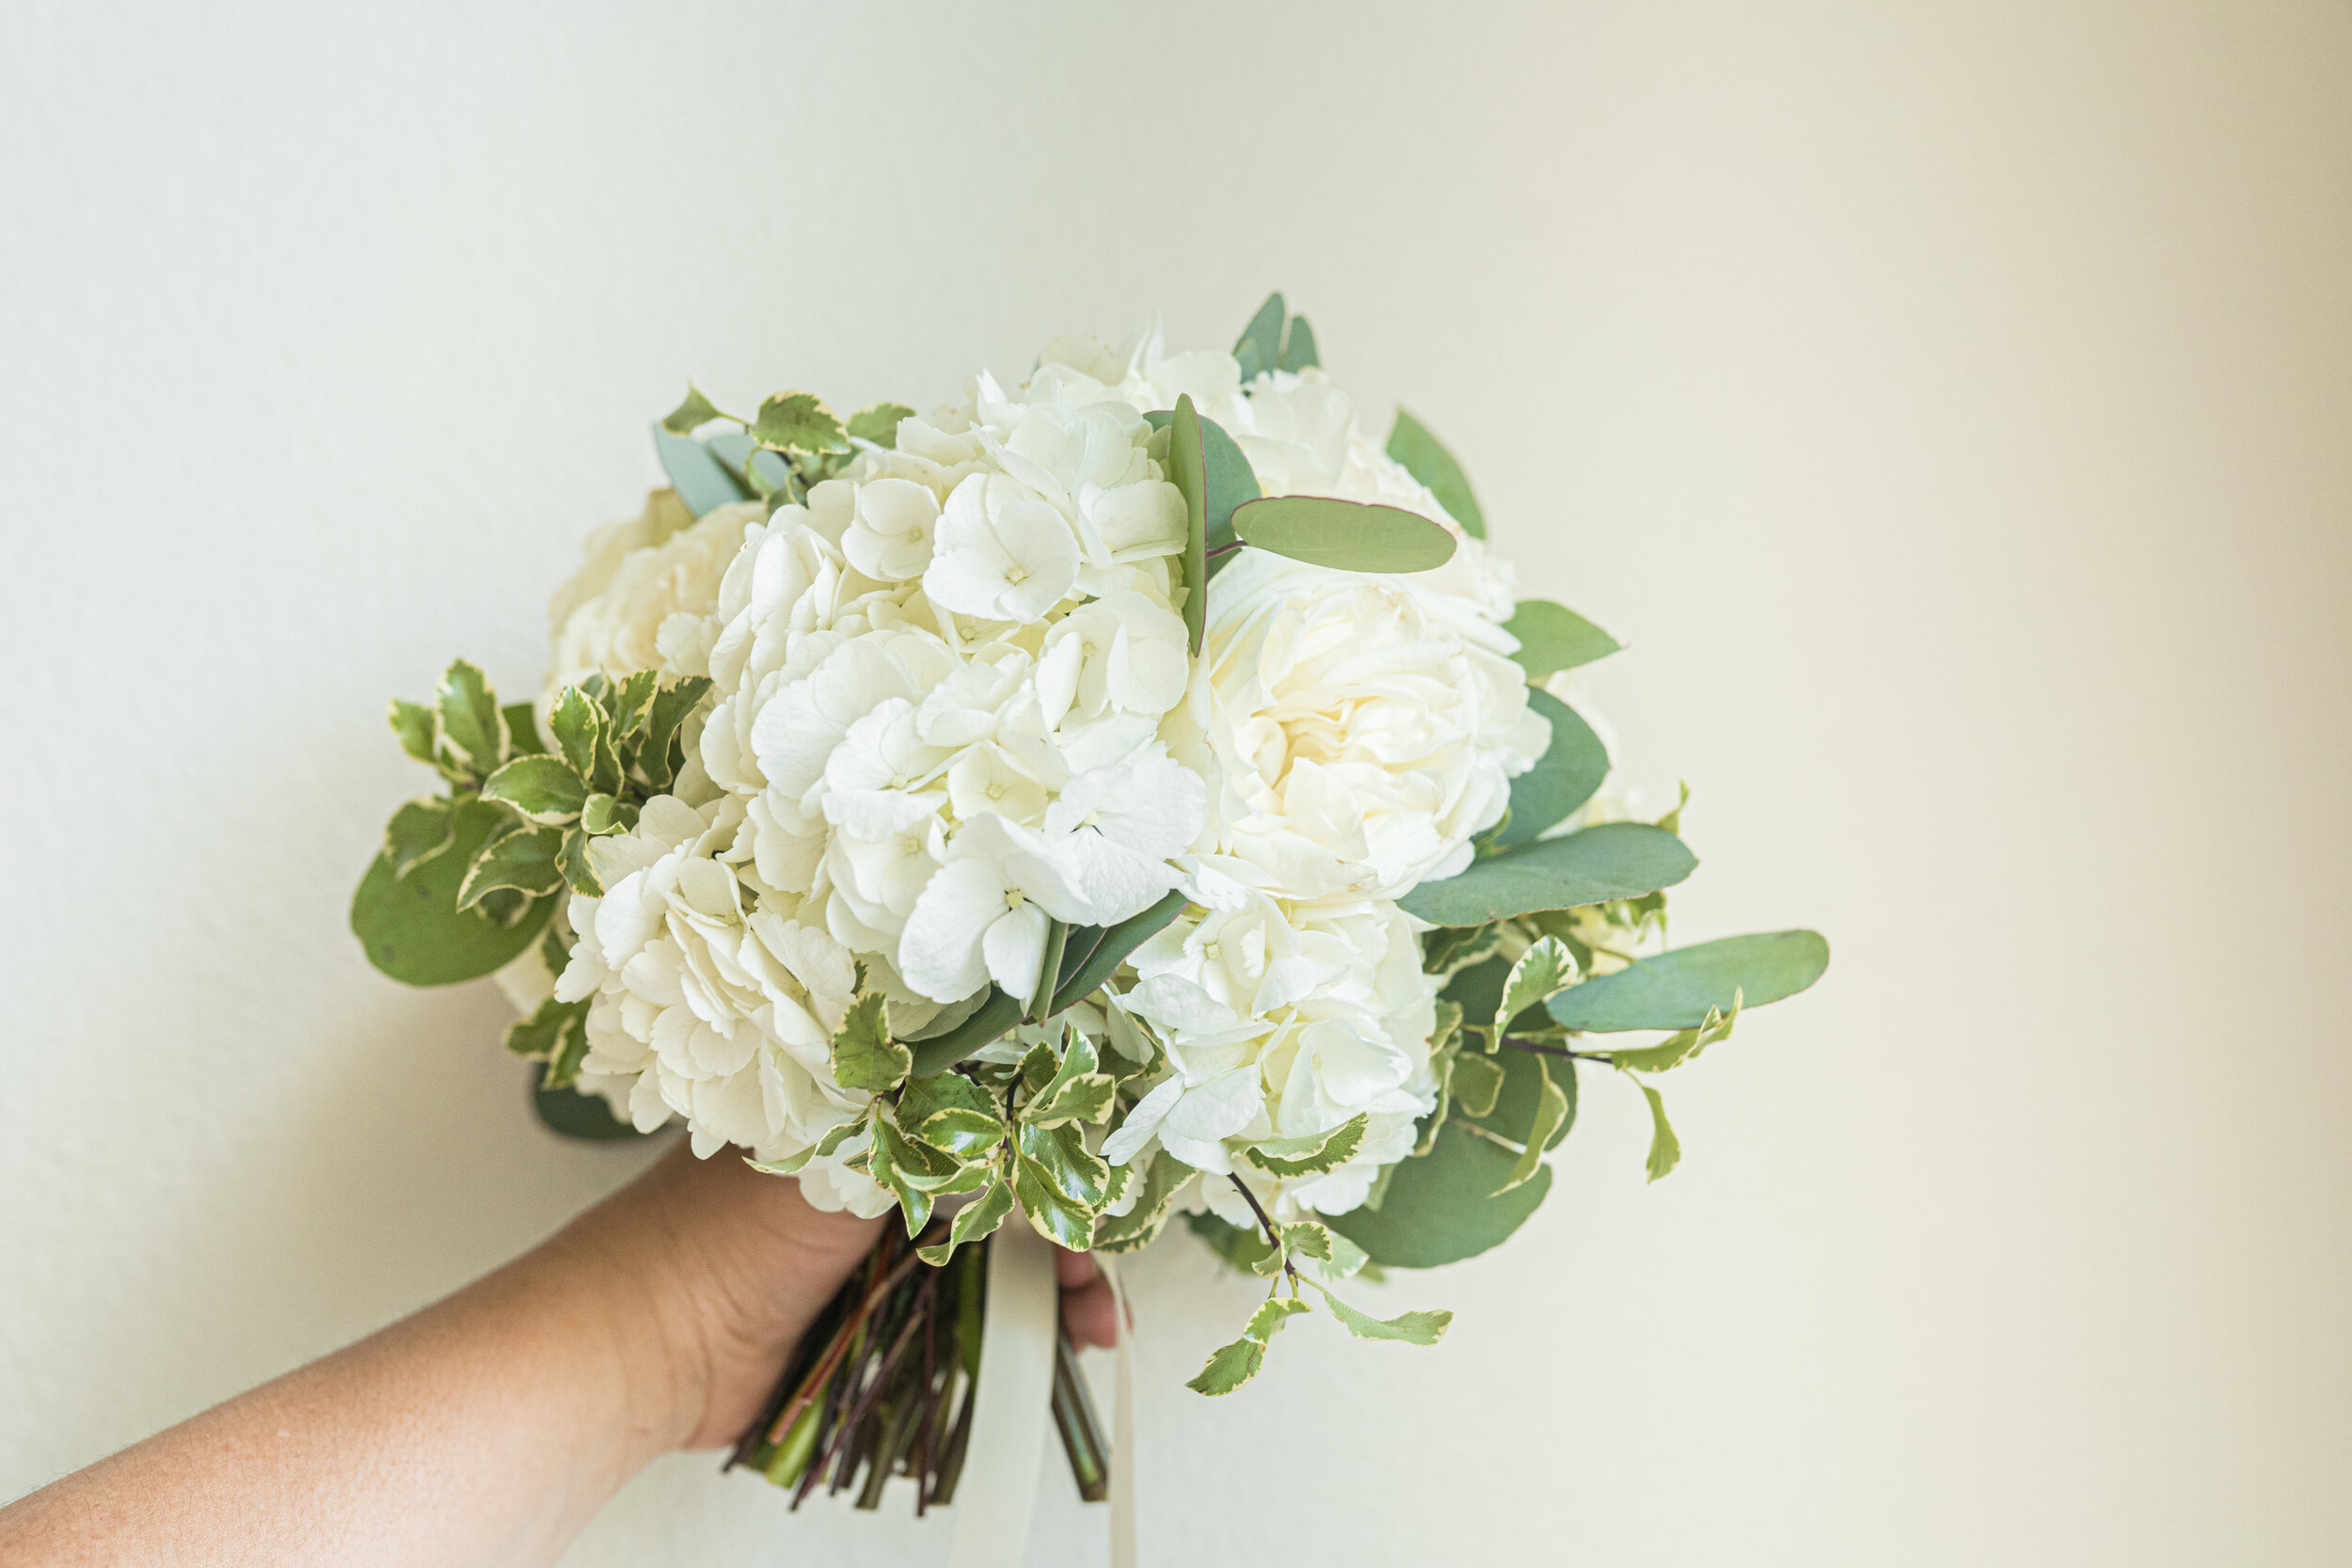 The Top 7 Wedding Flower Ideas & Trends for 2022